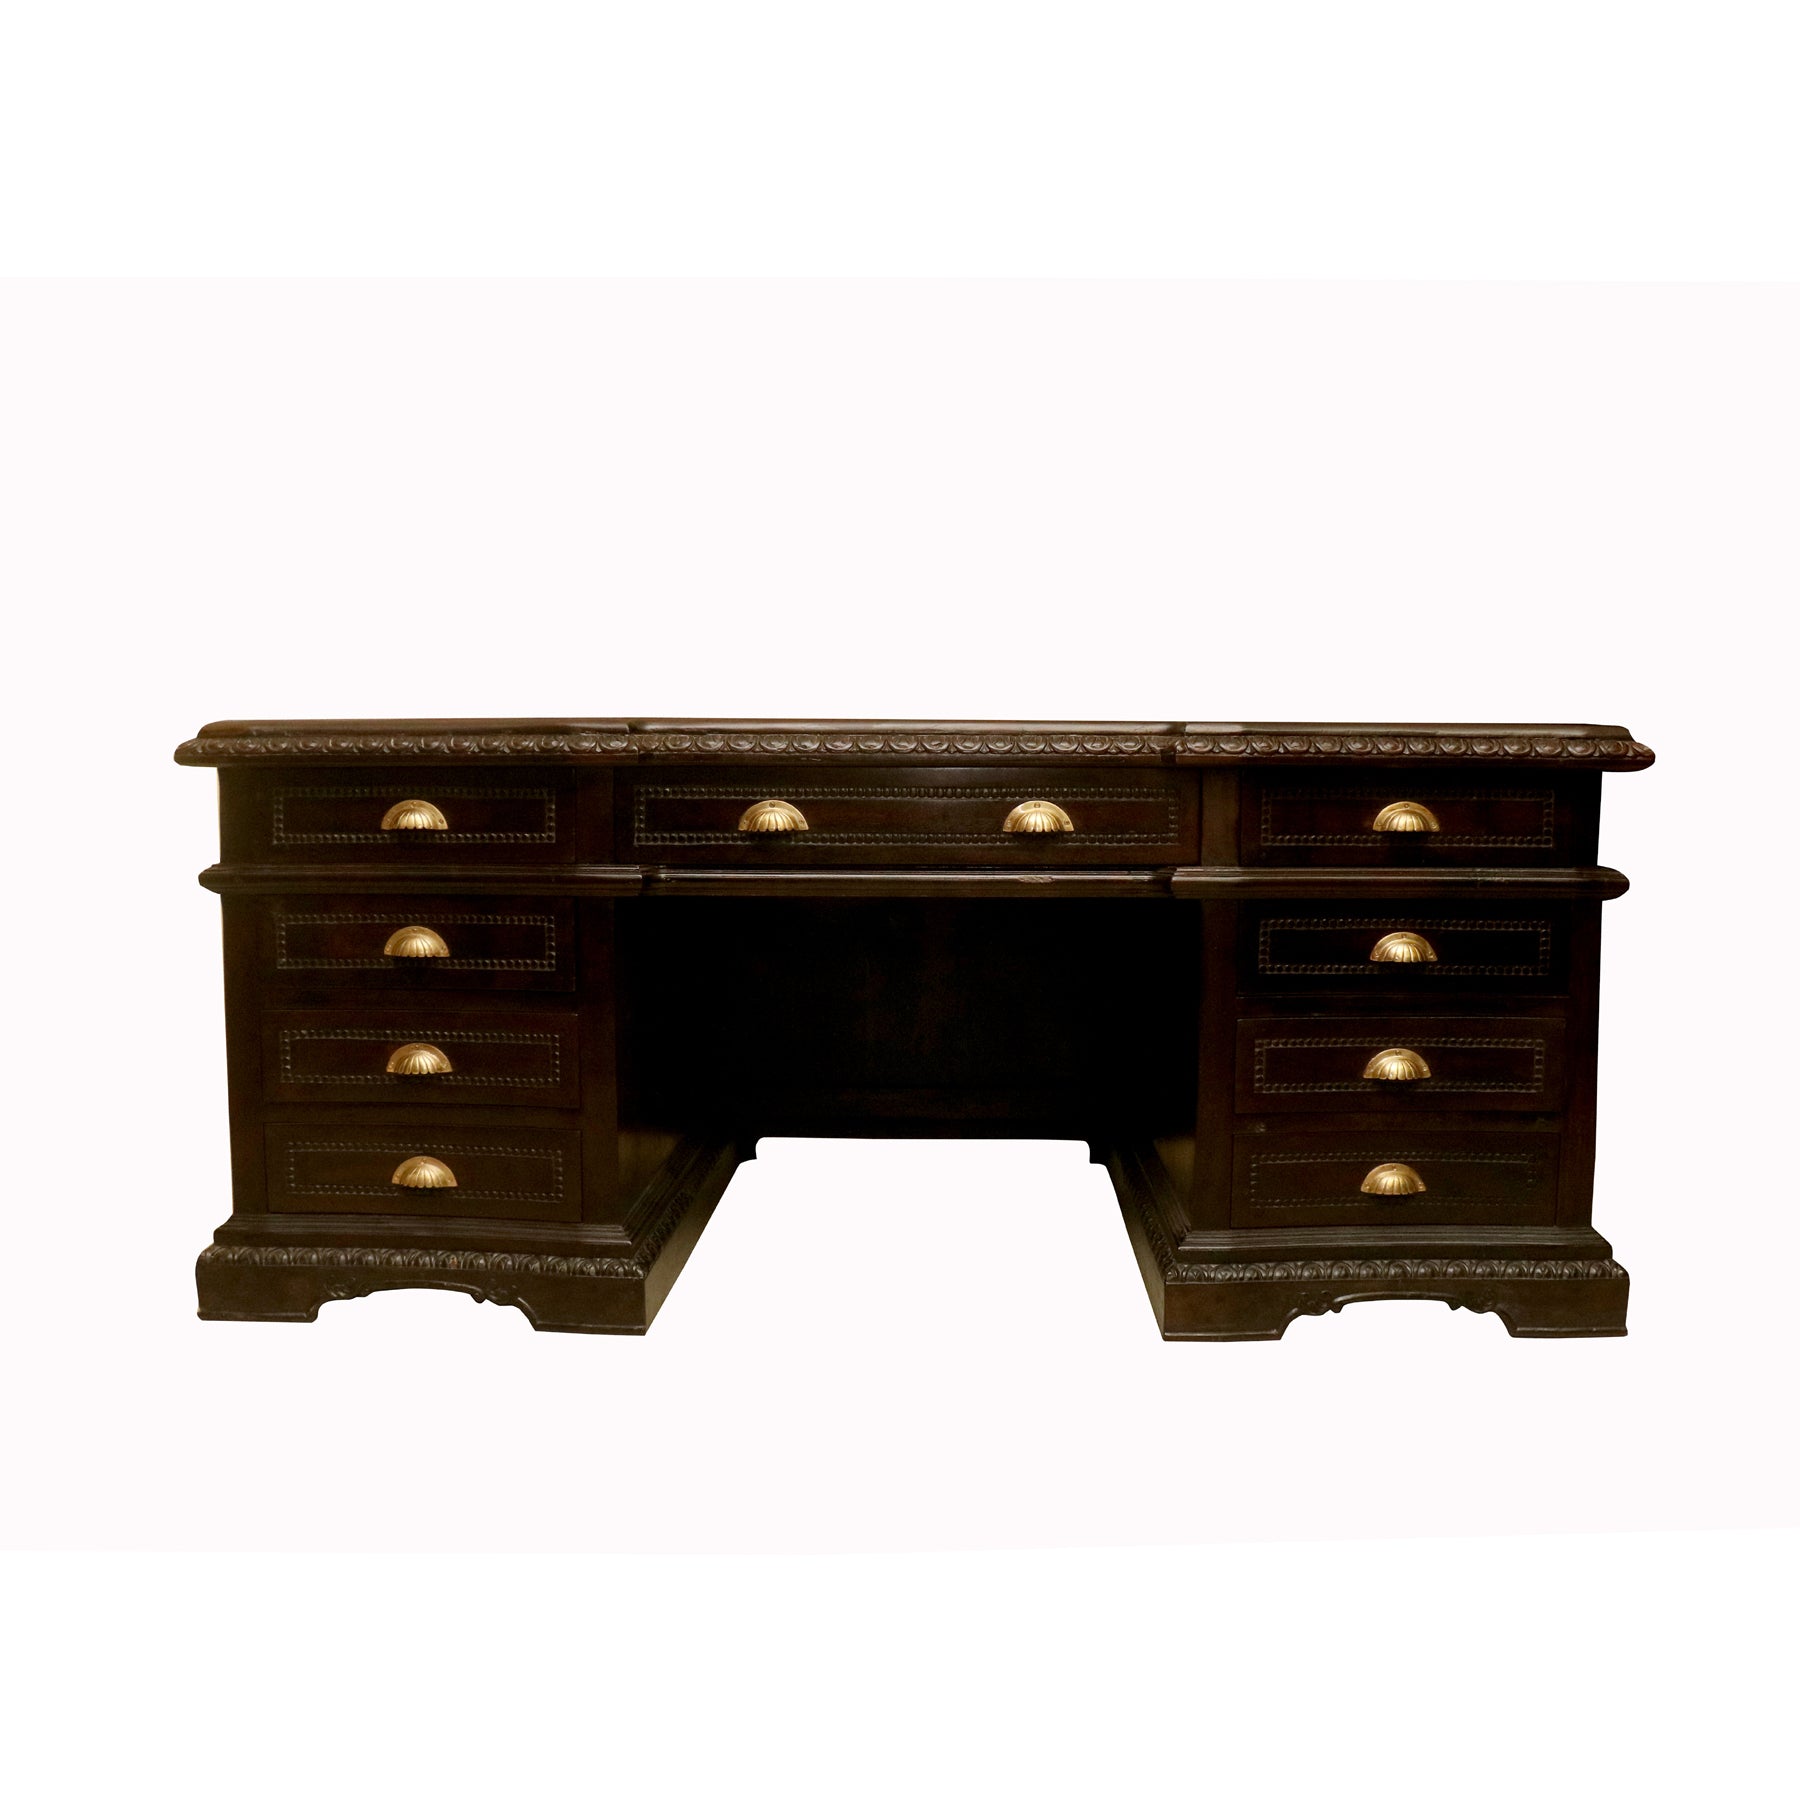 Classic Sturdy Wooden Royal Office Desk Study Table